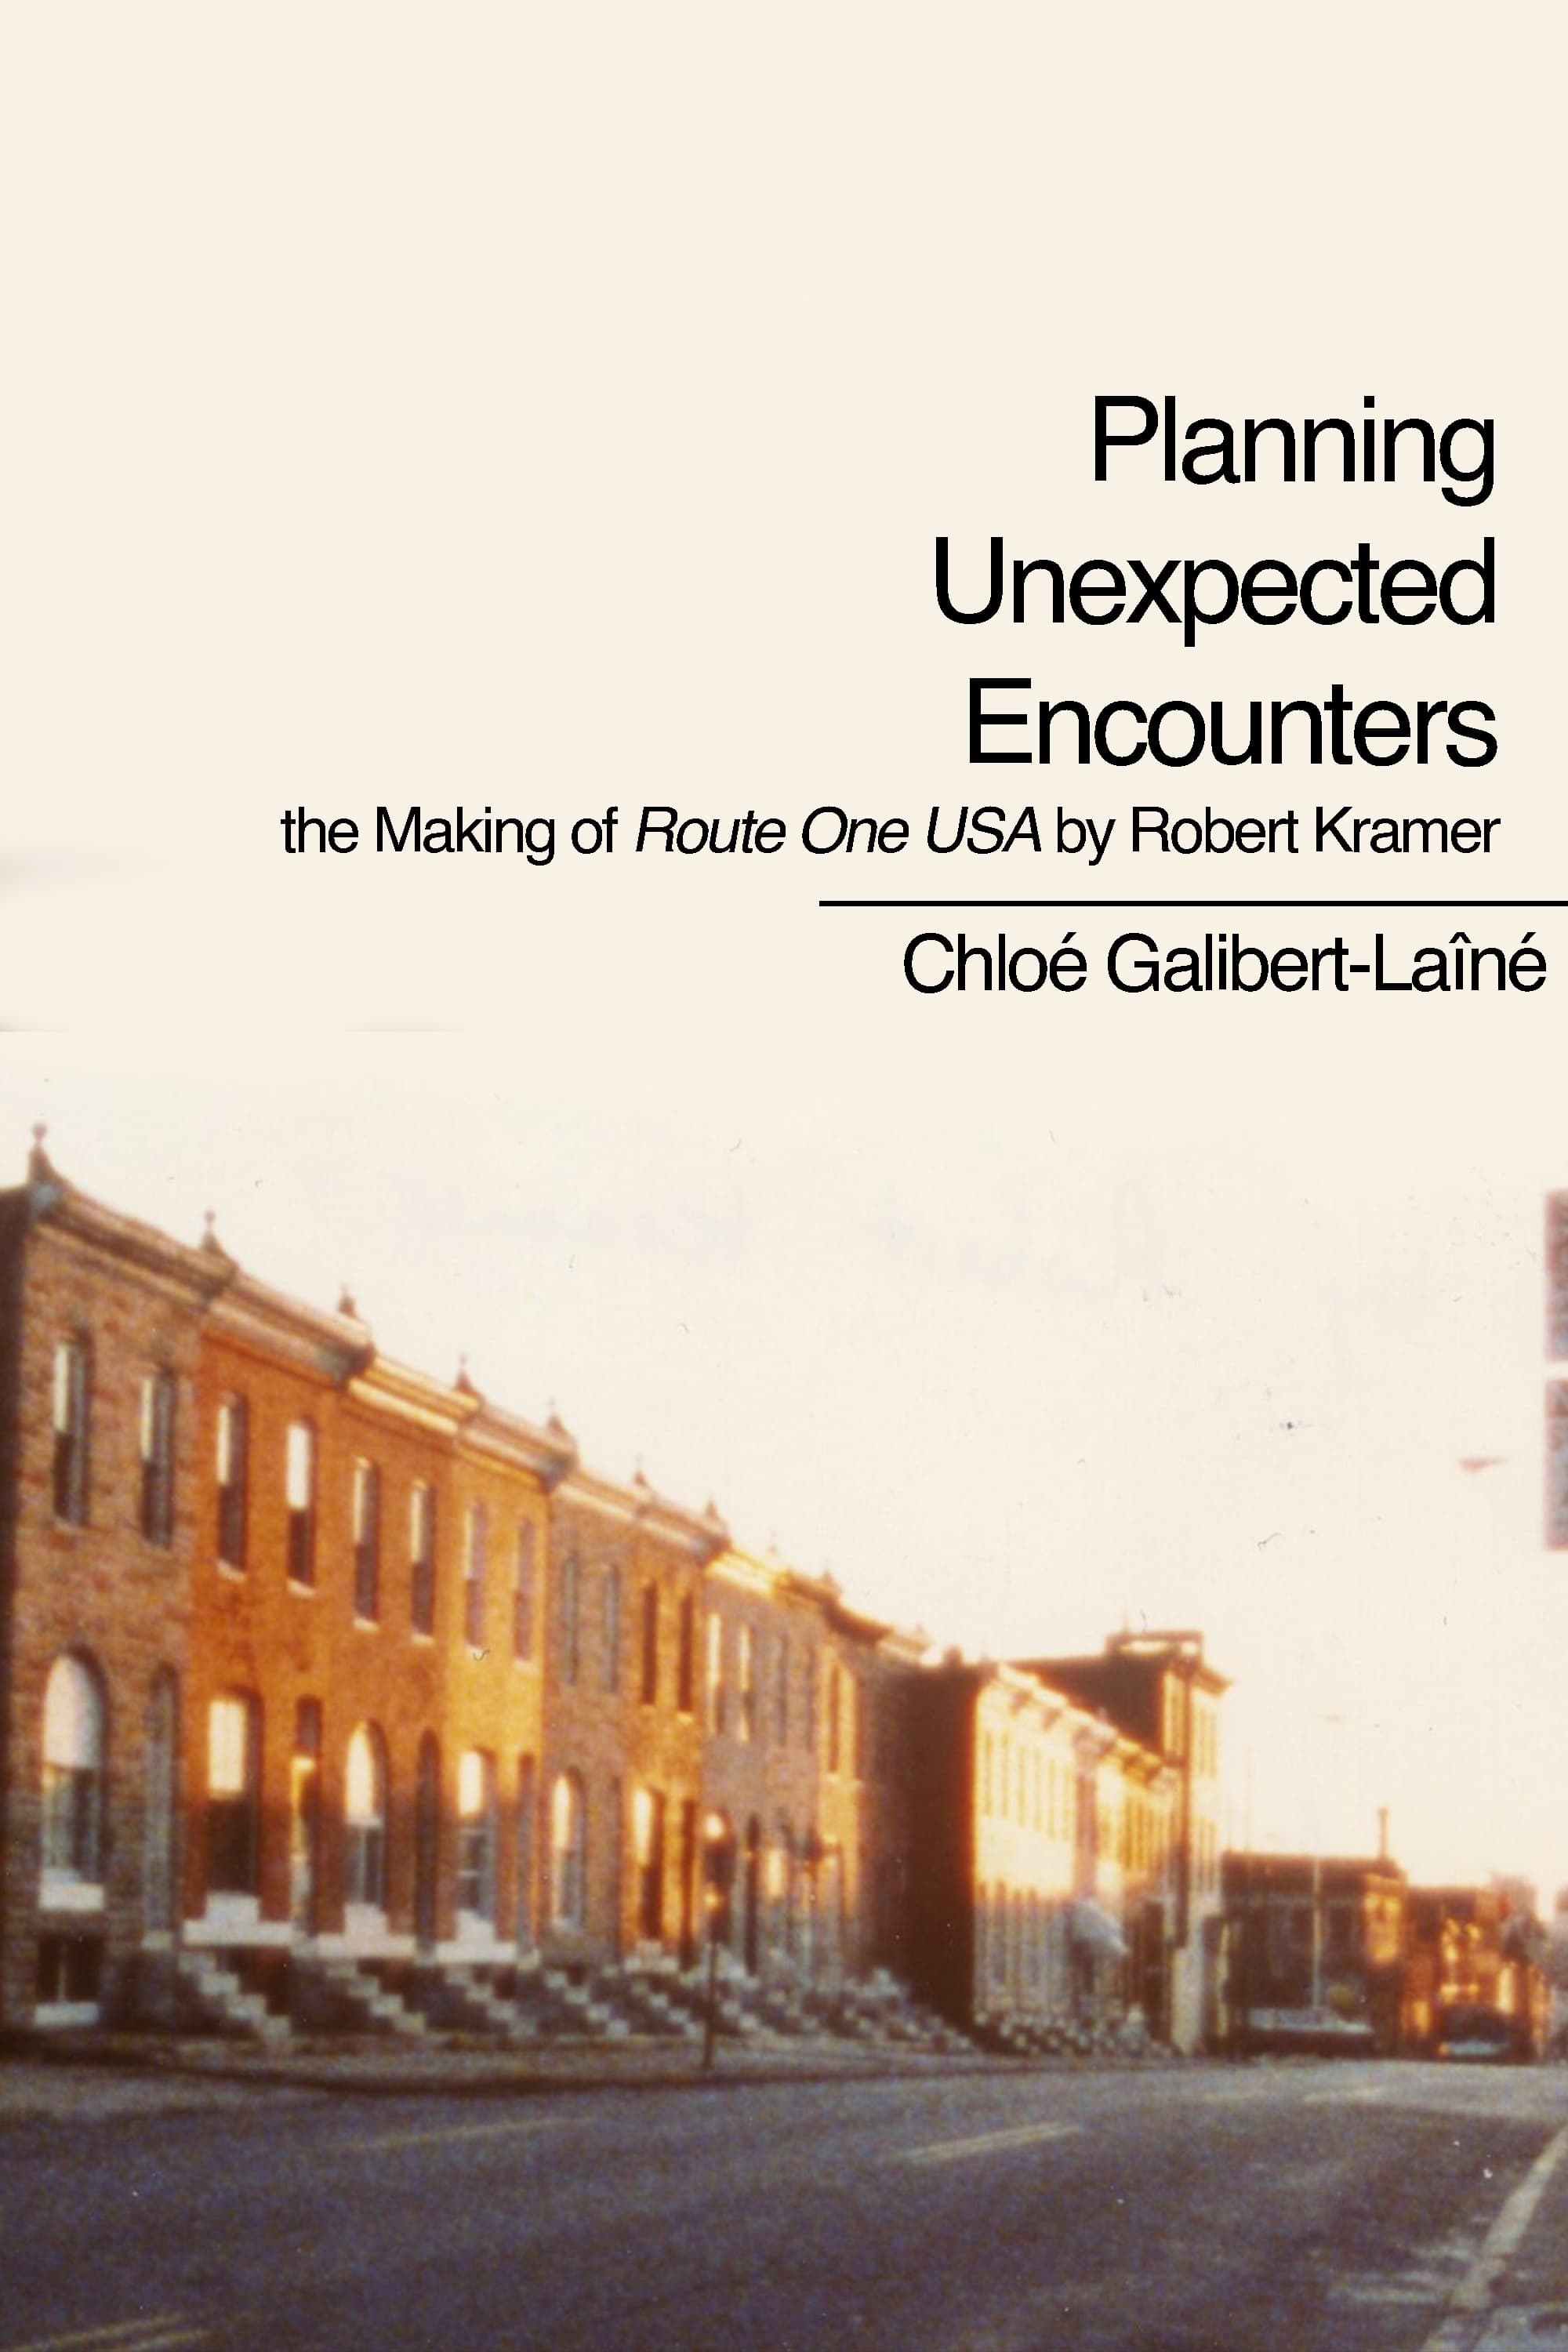 Planning Unexpected Encounters: the Making of Route One USA by Robert Kramer